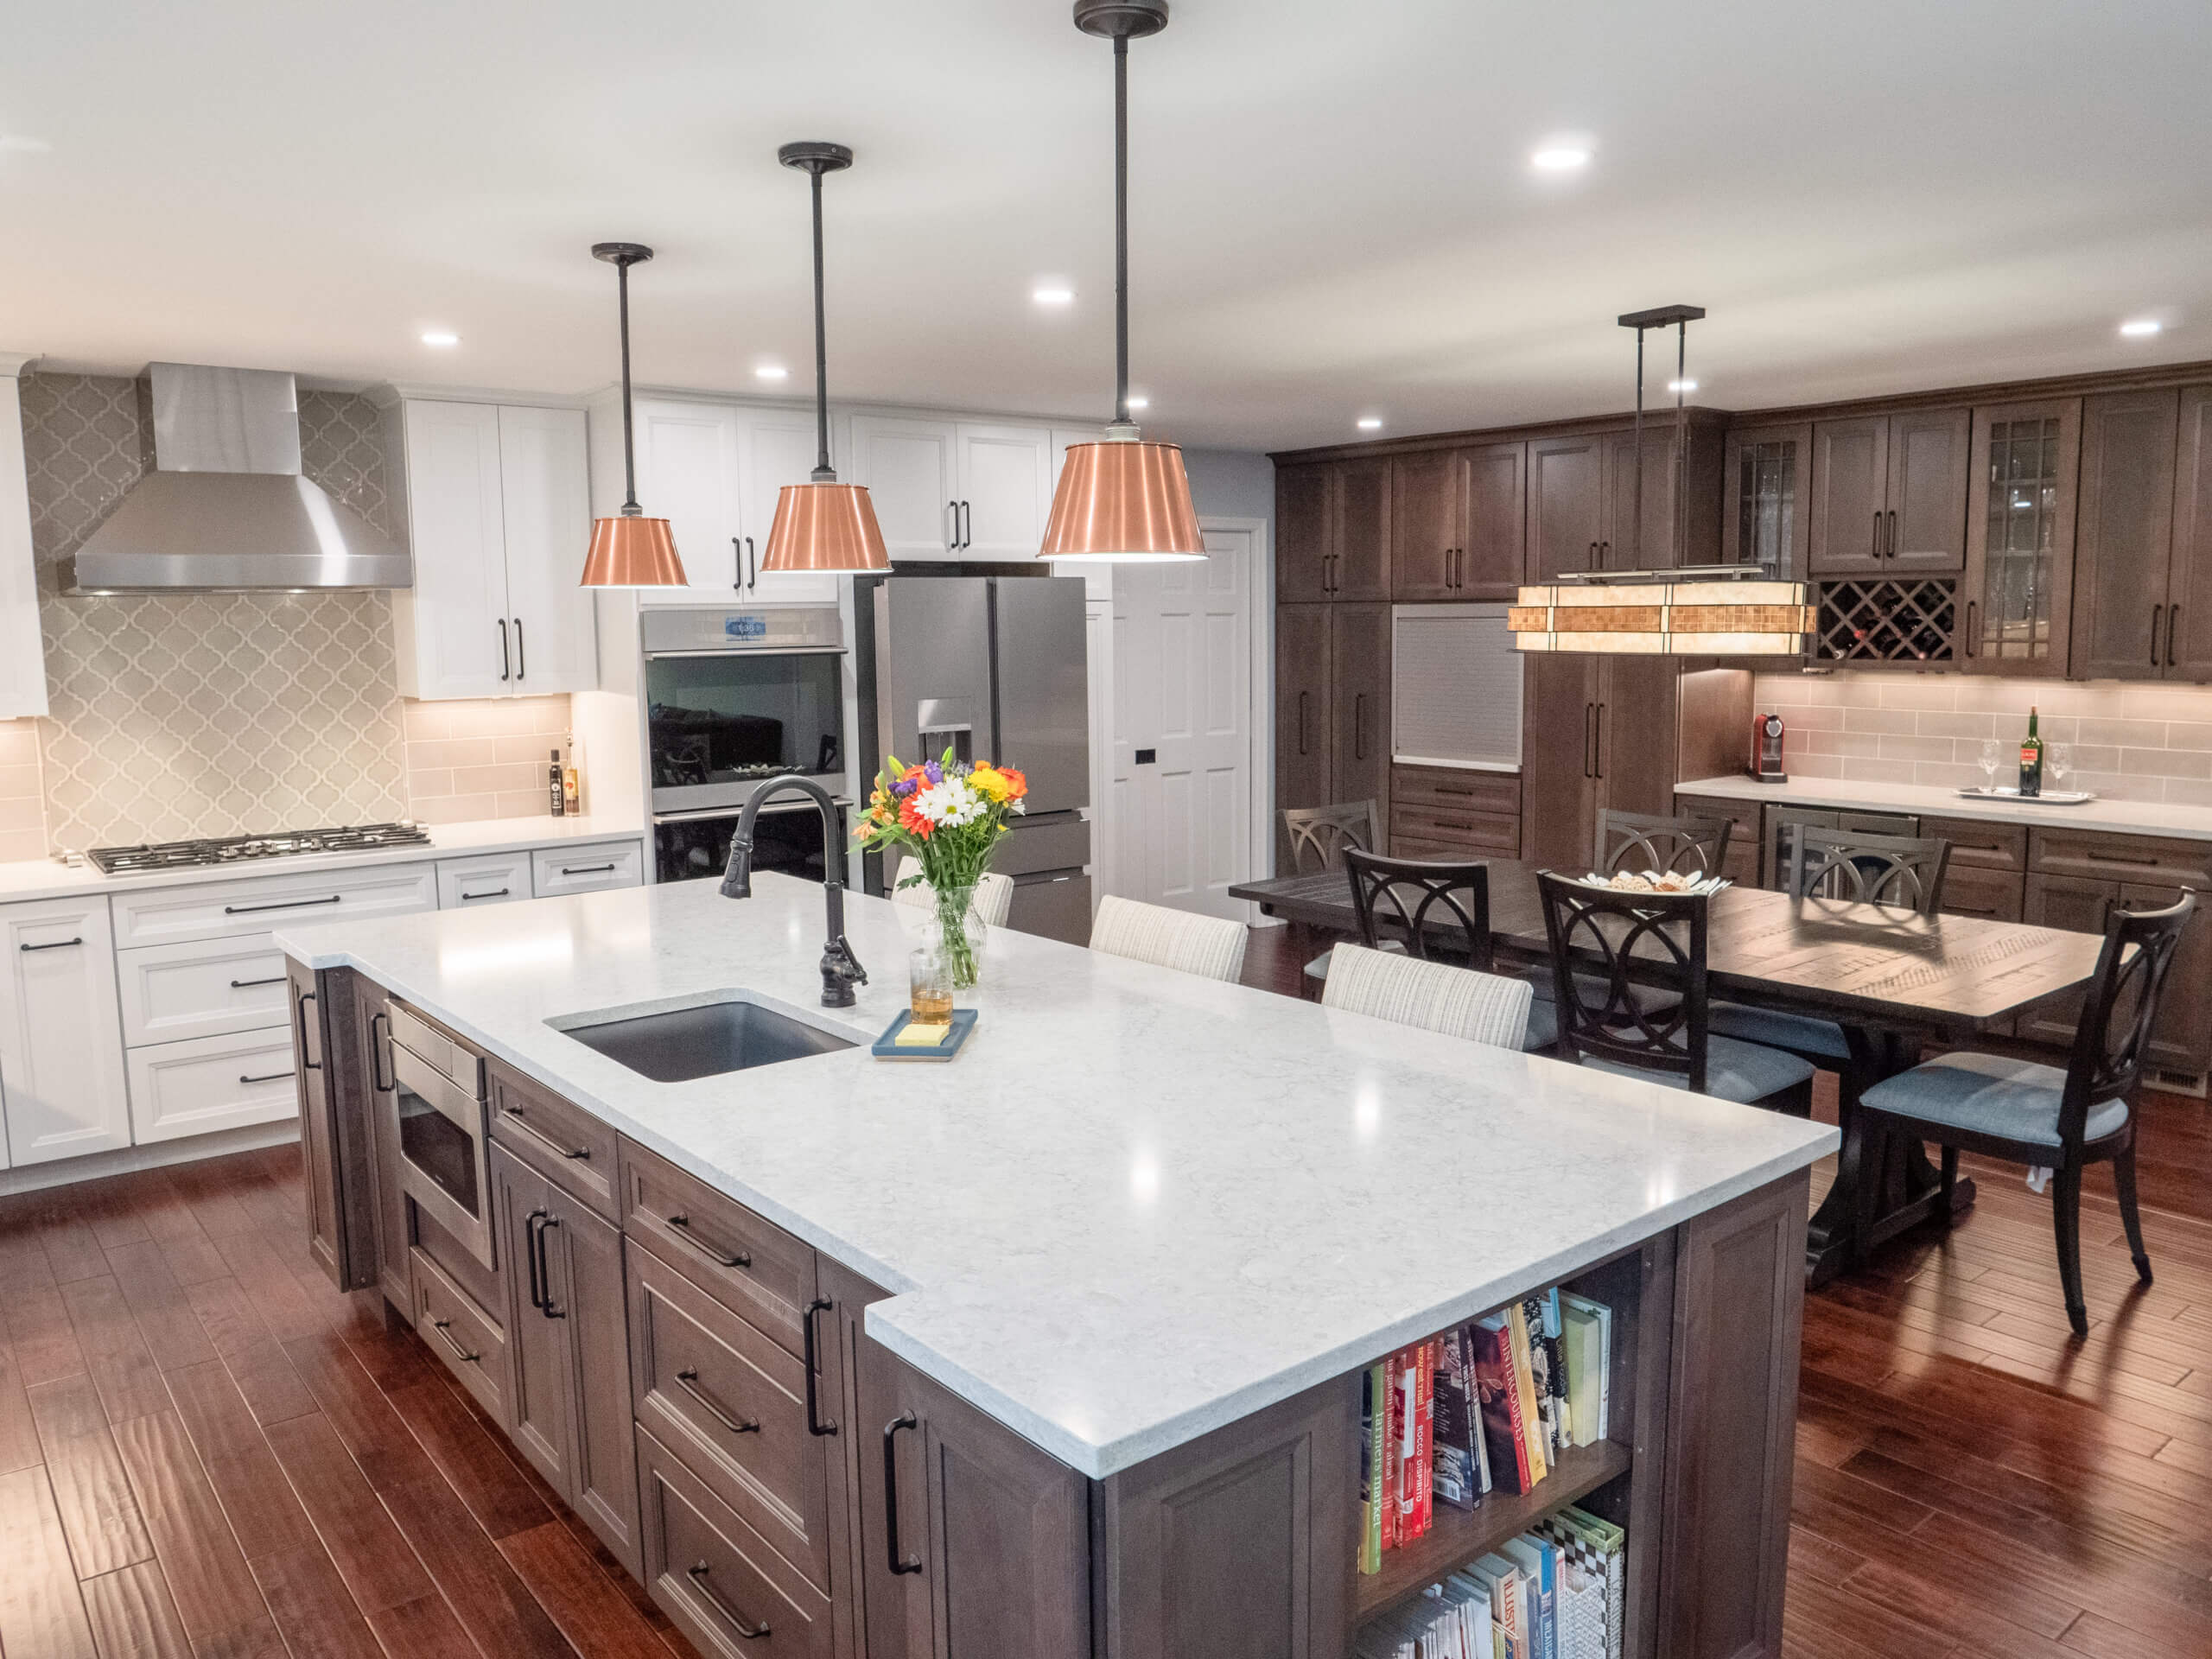 Large kitchen island with marble countertop